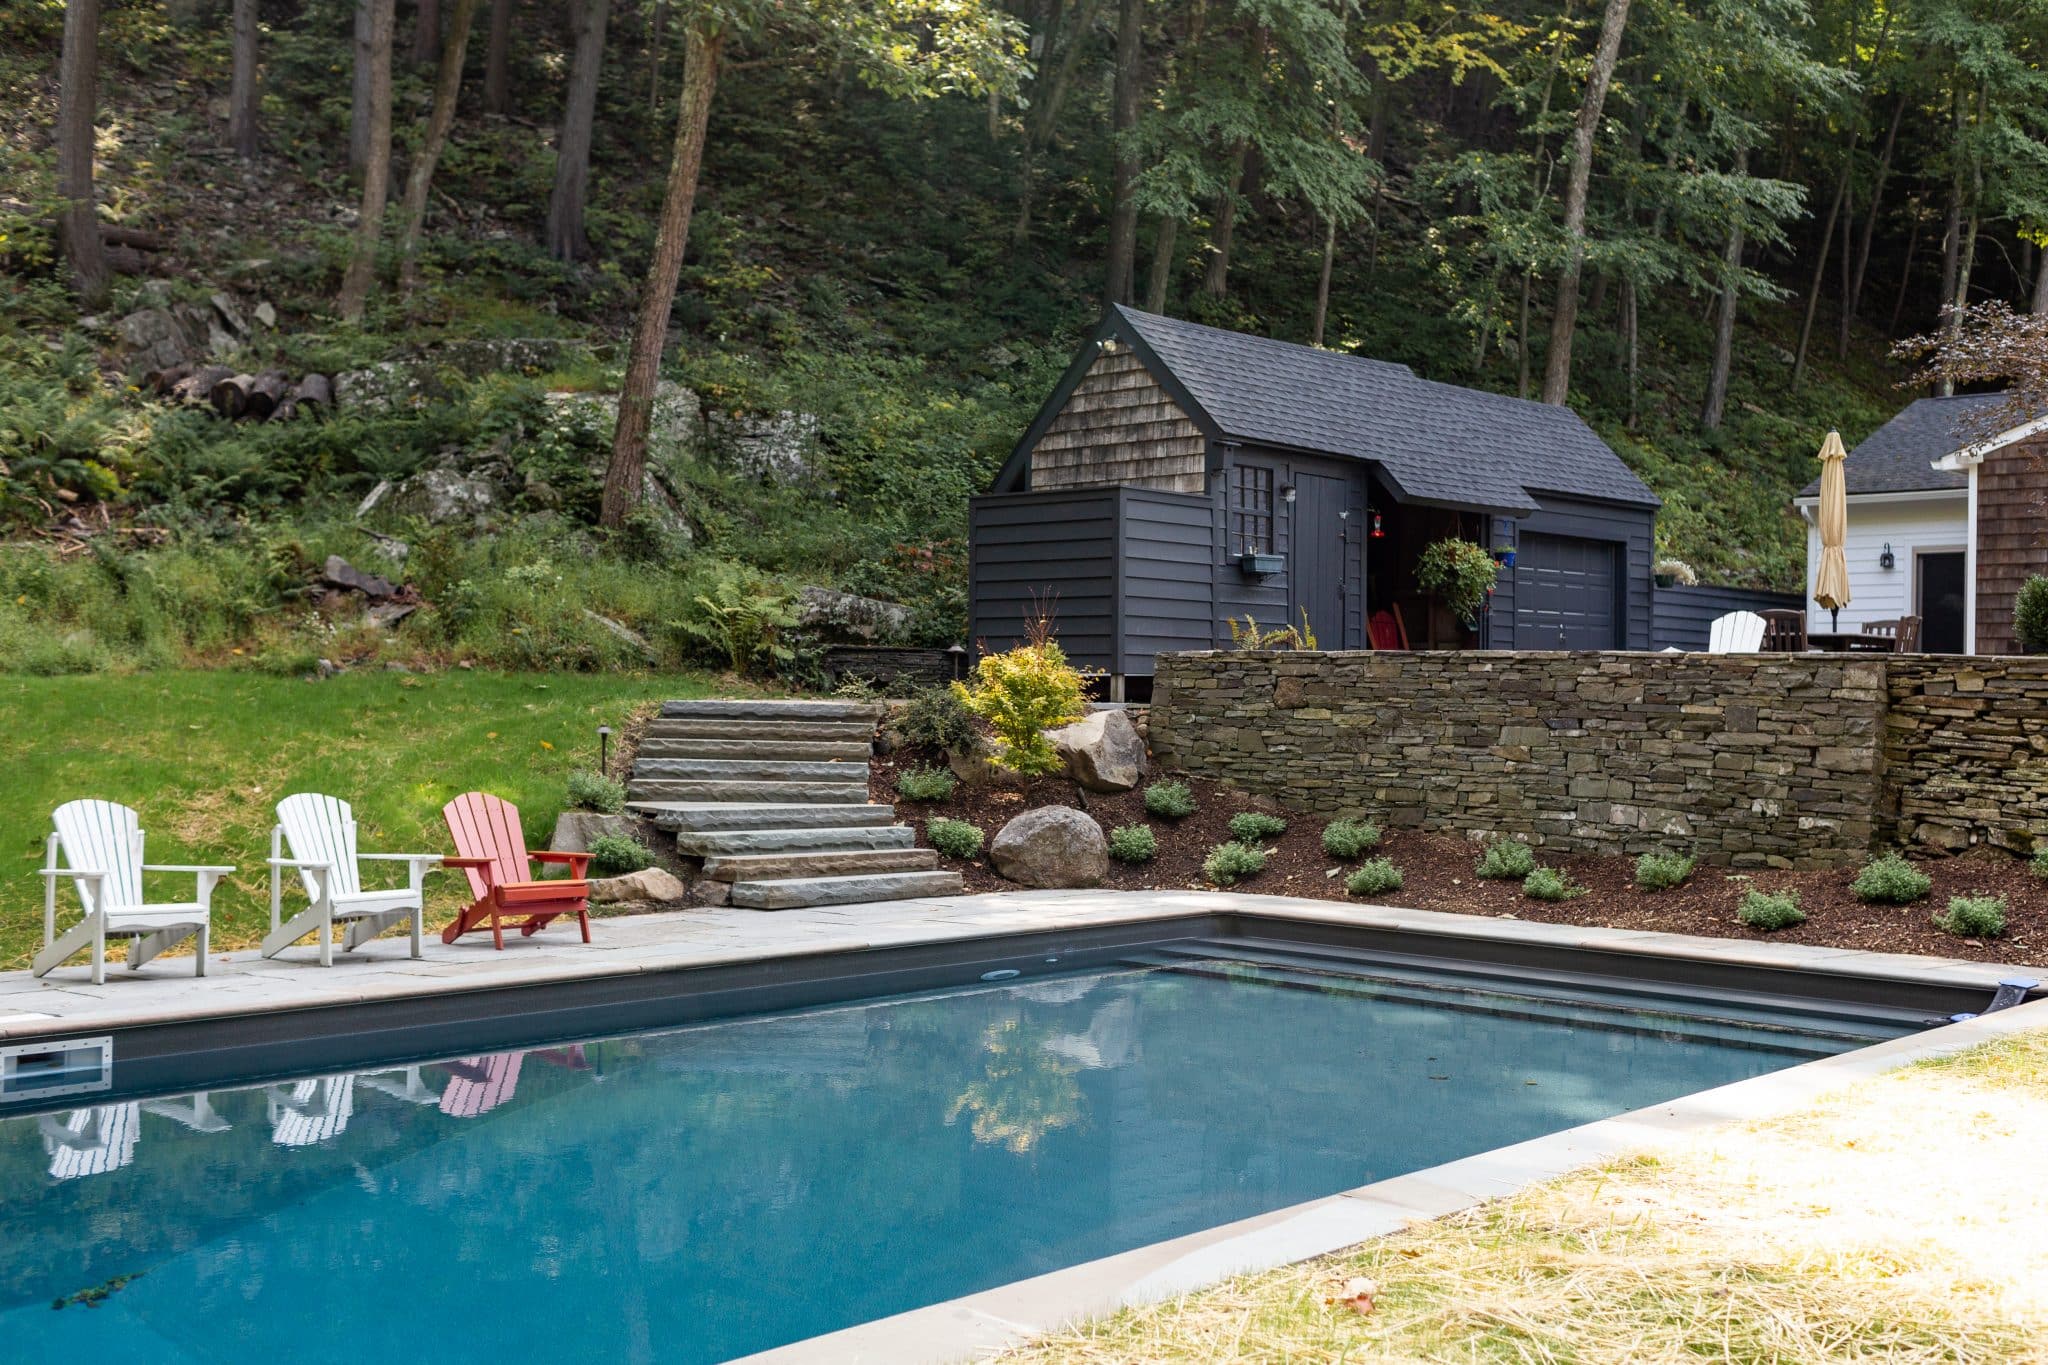 A pool with a bluestone patio and bluestone coping with split face steps to a higher patio and planting spaces planted with native plants in Woodstock, NY.